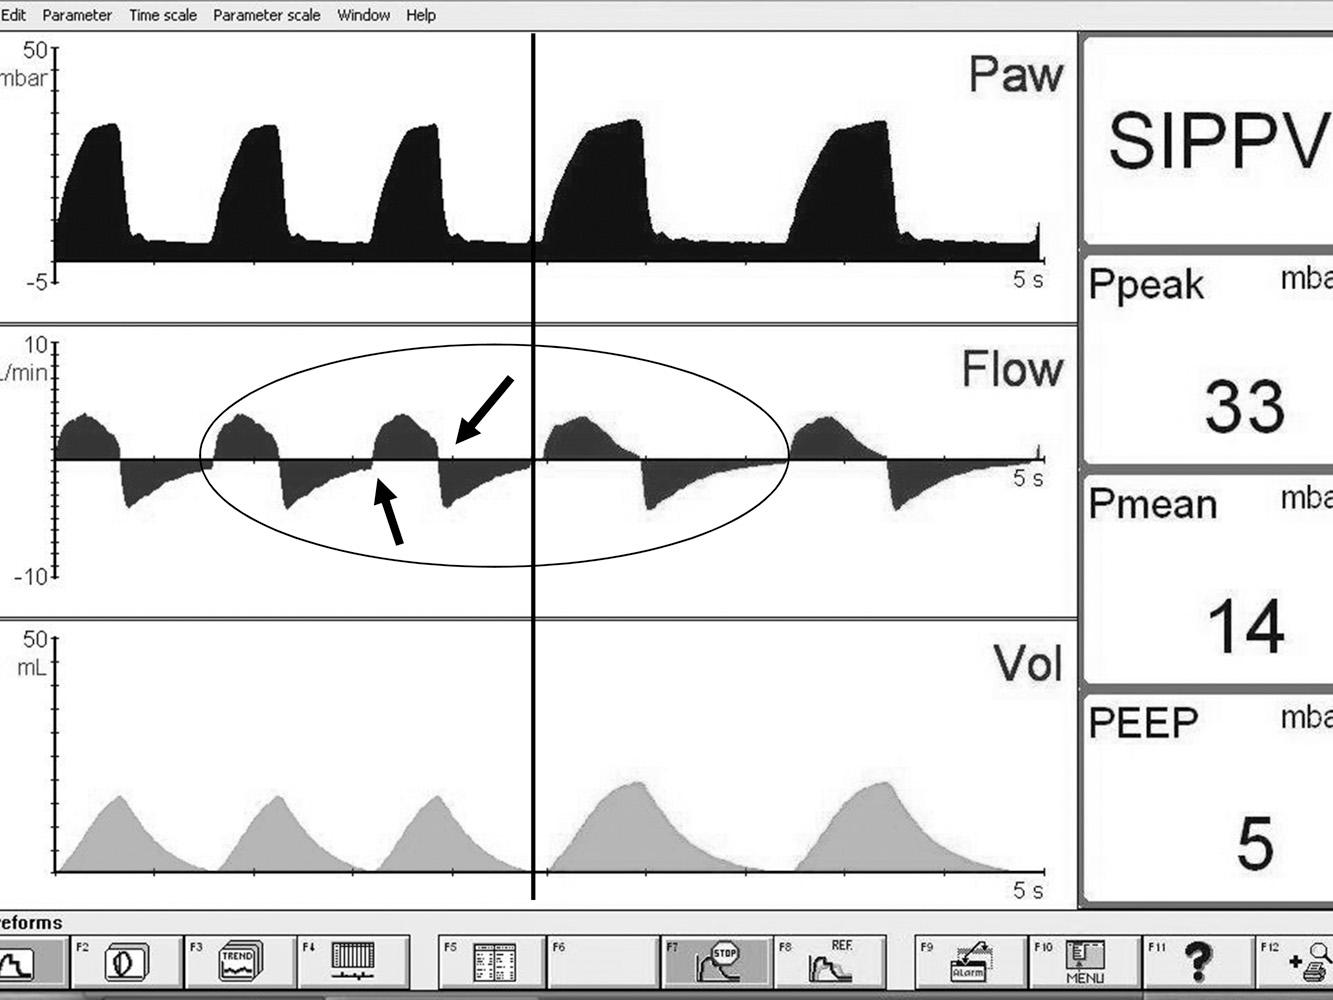 Fig. 10.8, Adequacy of inspiratory and expiratory time settings is best evaluated by examining the flow waveform. The left side of the panel shows that the set expiratory time is insufficient to allow complete exhalation because there is still active flow out of the lungs when the next inflation is triggered (arrow). Similarly, inspiratory flow has not returned to baseline when the ventilator cycles on (second arrow). The right side of the panel shows that with a slower ventilator rate (i.e., longer expiratory time) the expiratory flow has returned to zero before the next inflation and the inspiratory flow has also dropped to baseline before exhalation.